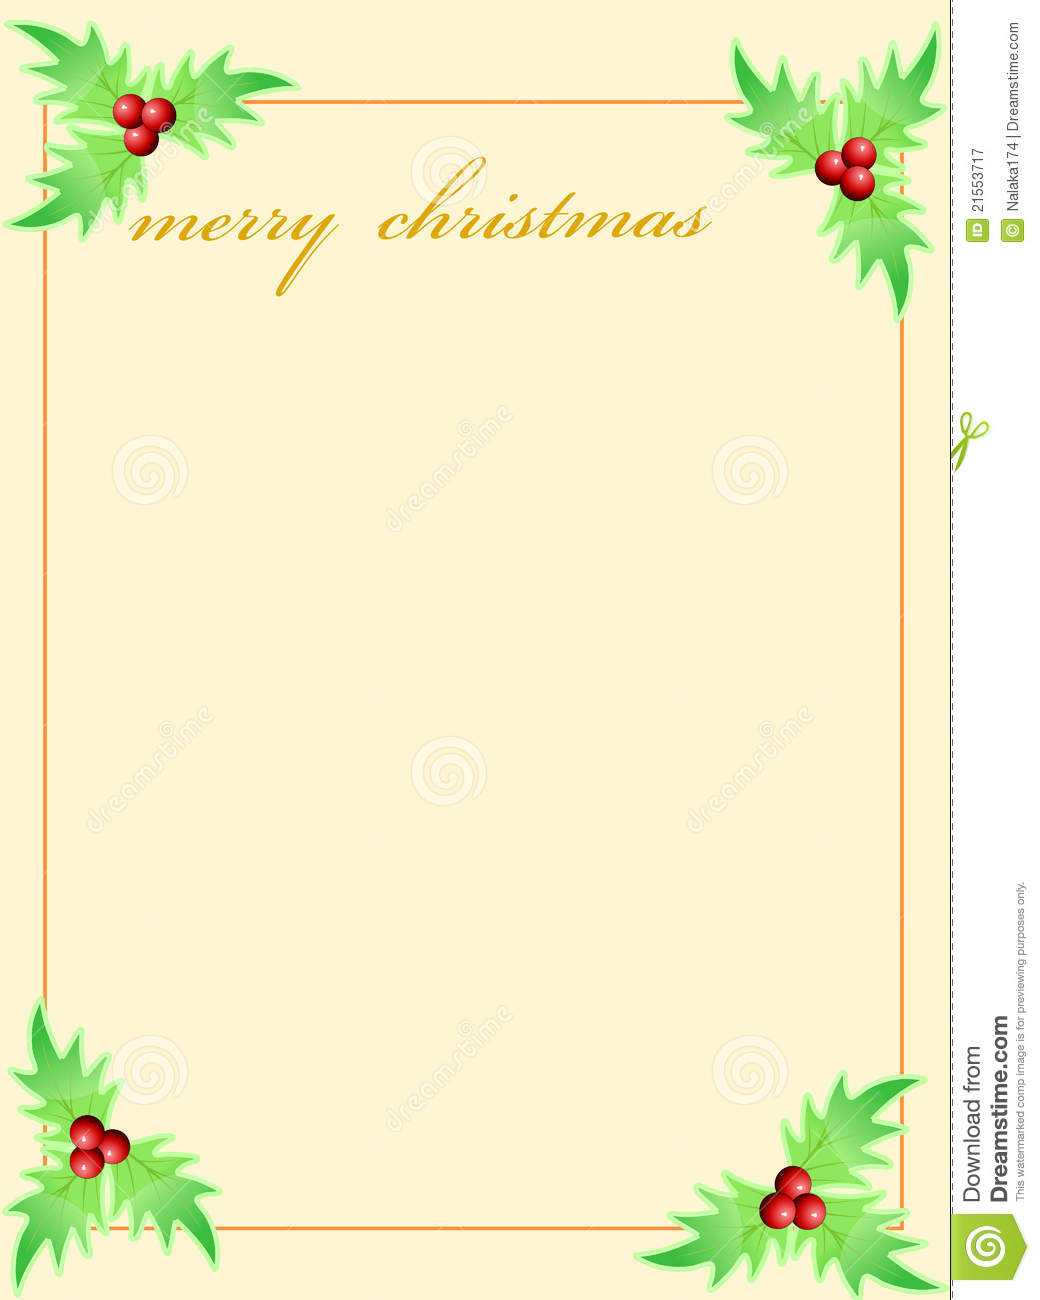 16 Holiday Greeting Card Template Images – Free Christmas Within Blank Christmas Card Templates Free